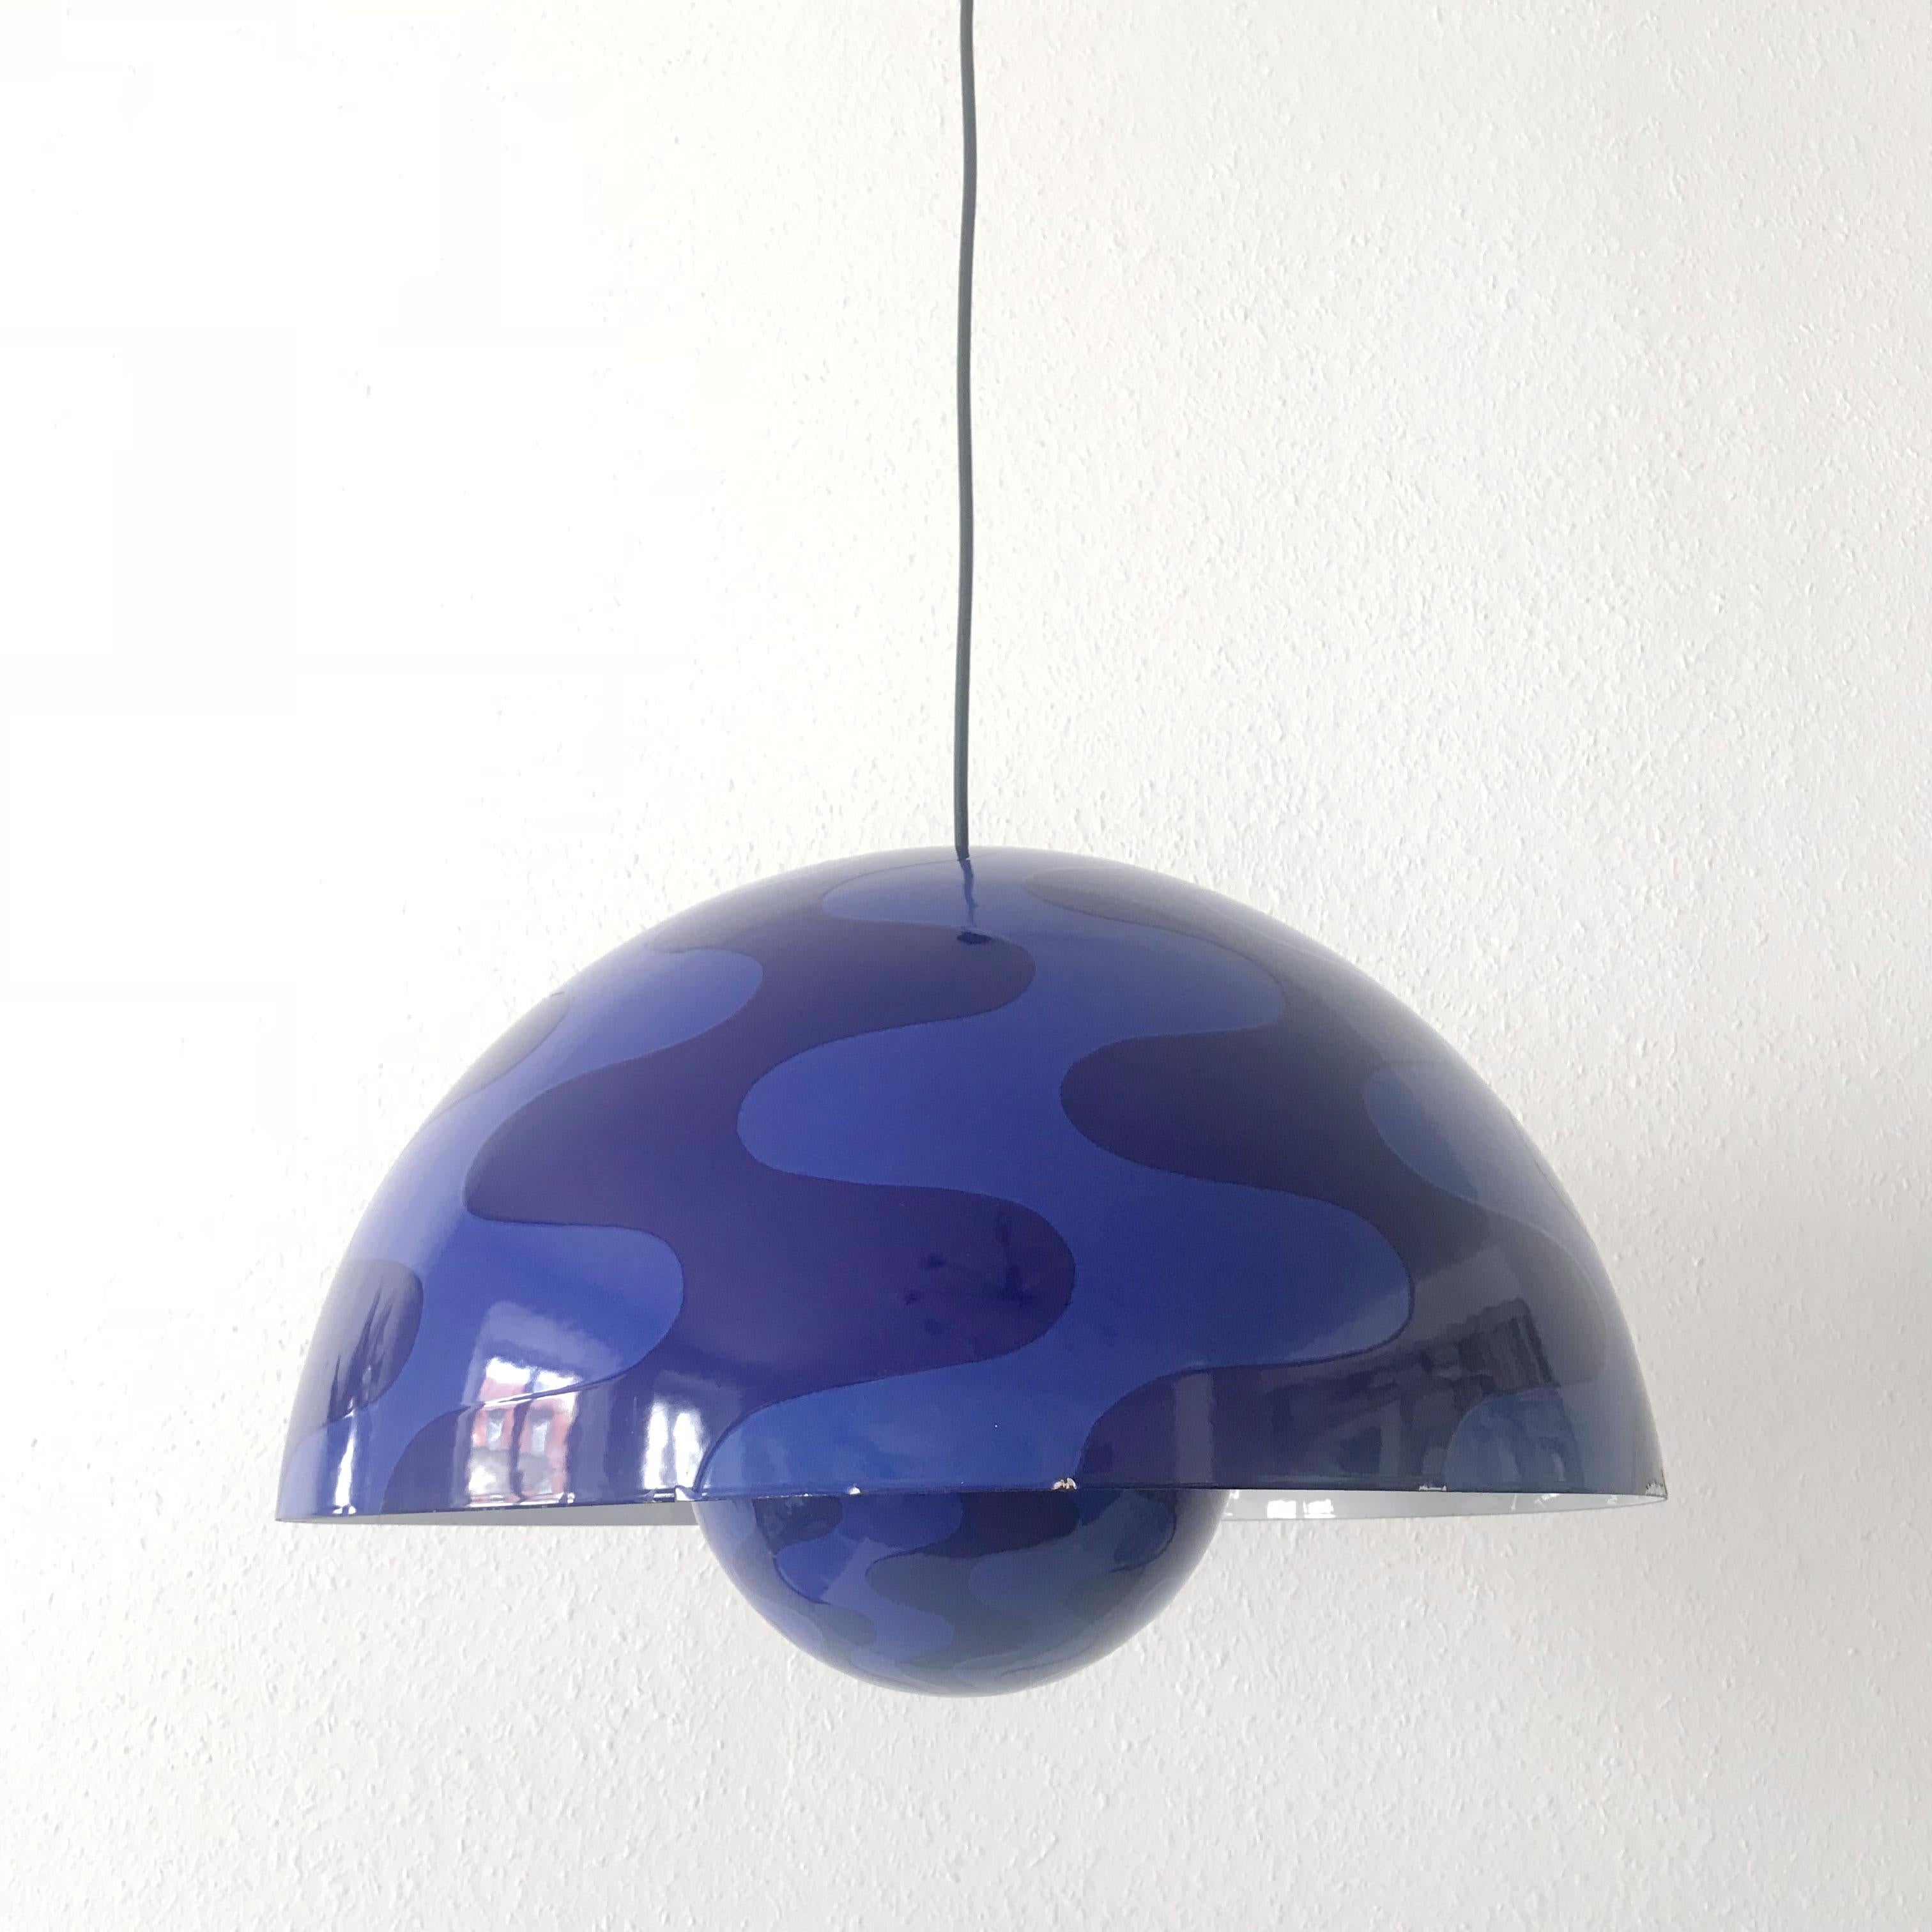 Rare and Large Flower Pot Pendant Lamp by Verner Panton for Louis Poulsen 1971 For Sale 1